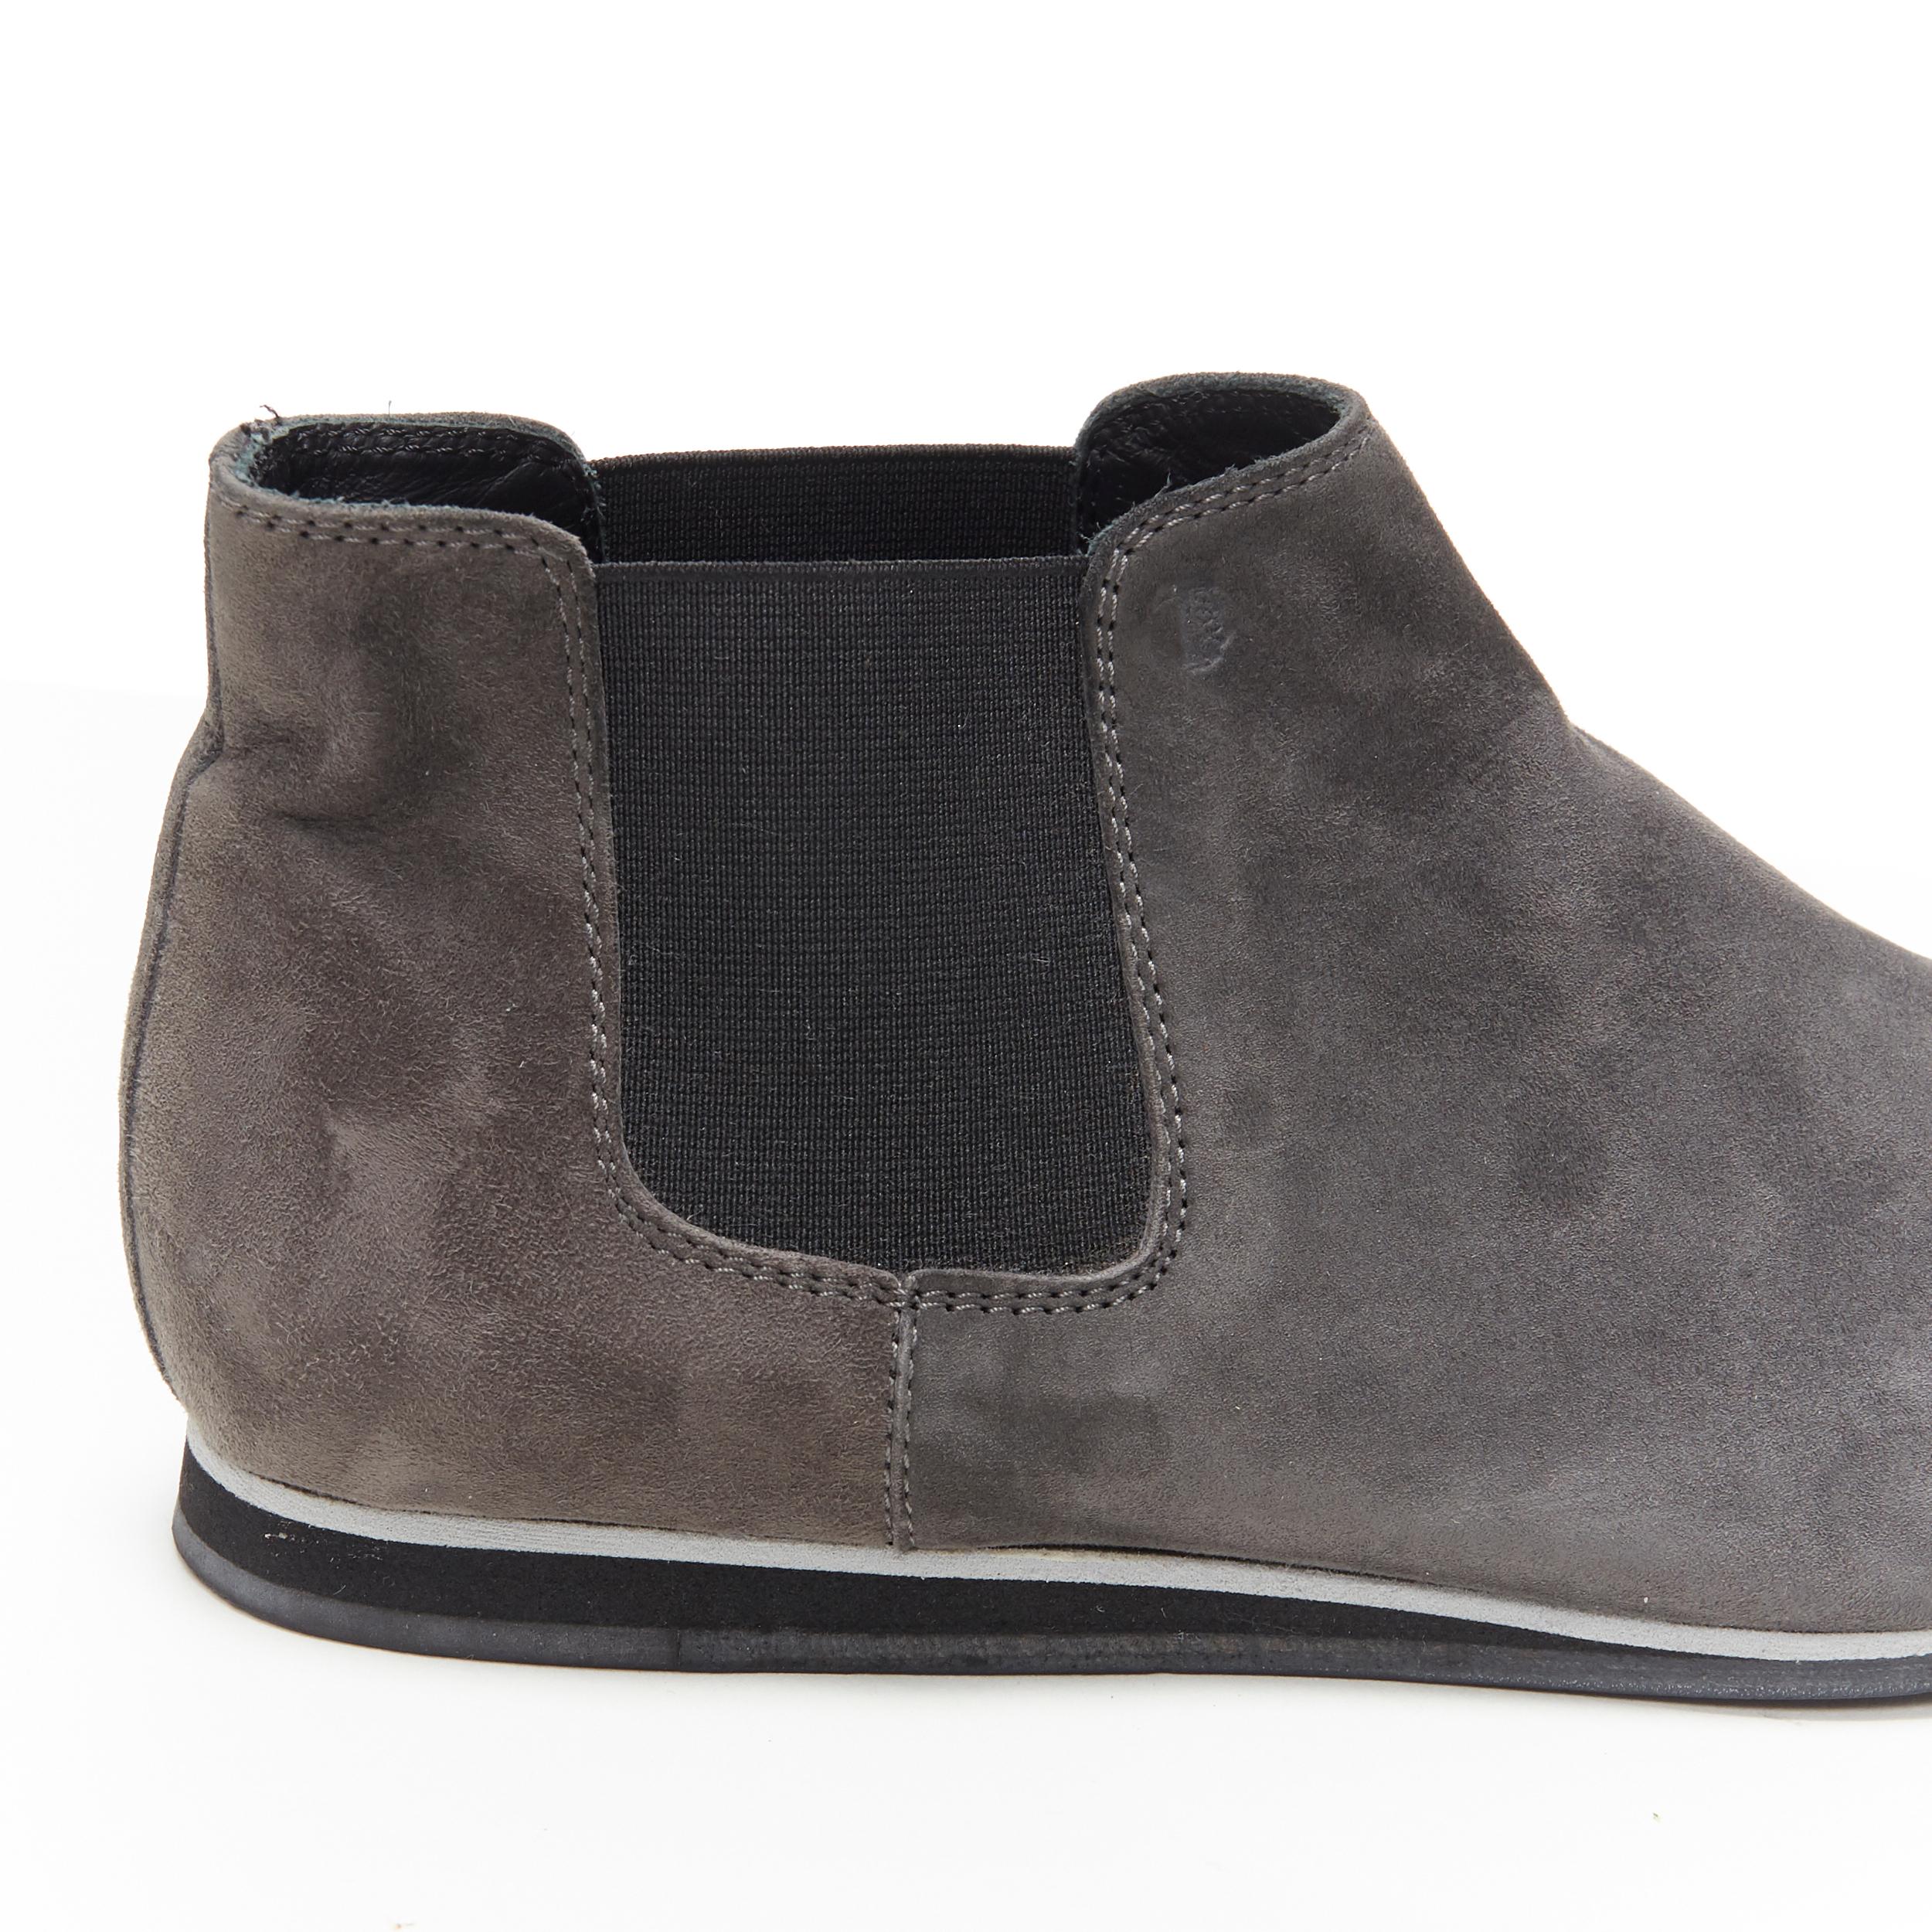 TOD'S No Code dark grey suede elastic gusset round toe flat ankle bootie EU37 For Sale 1